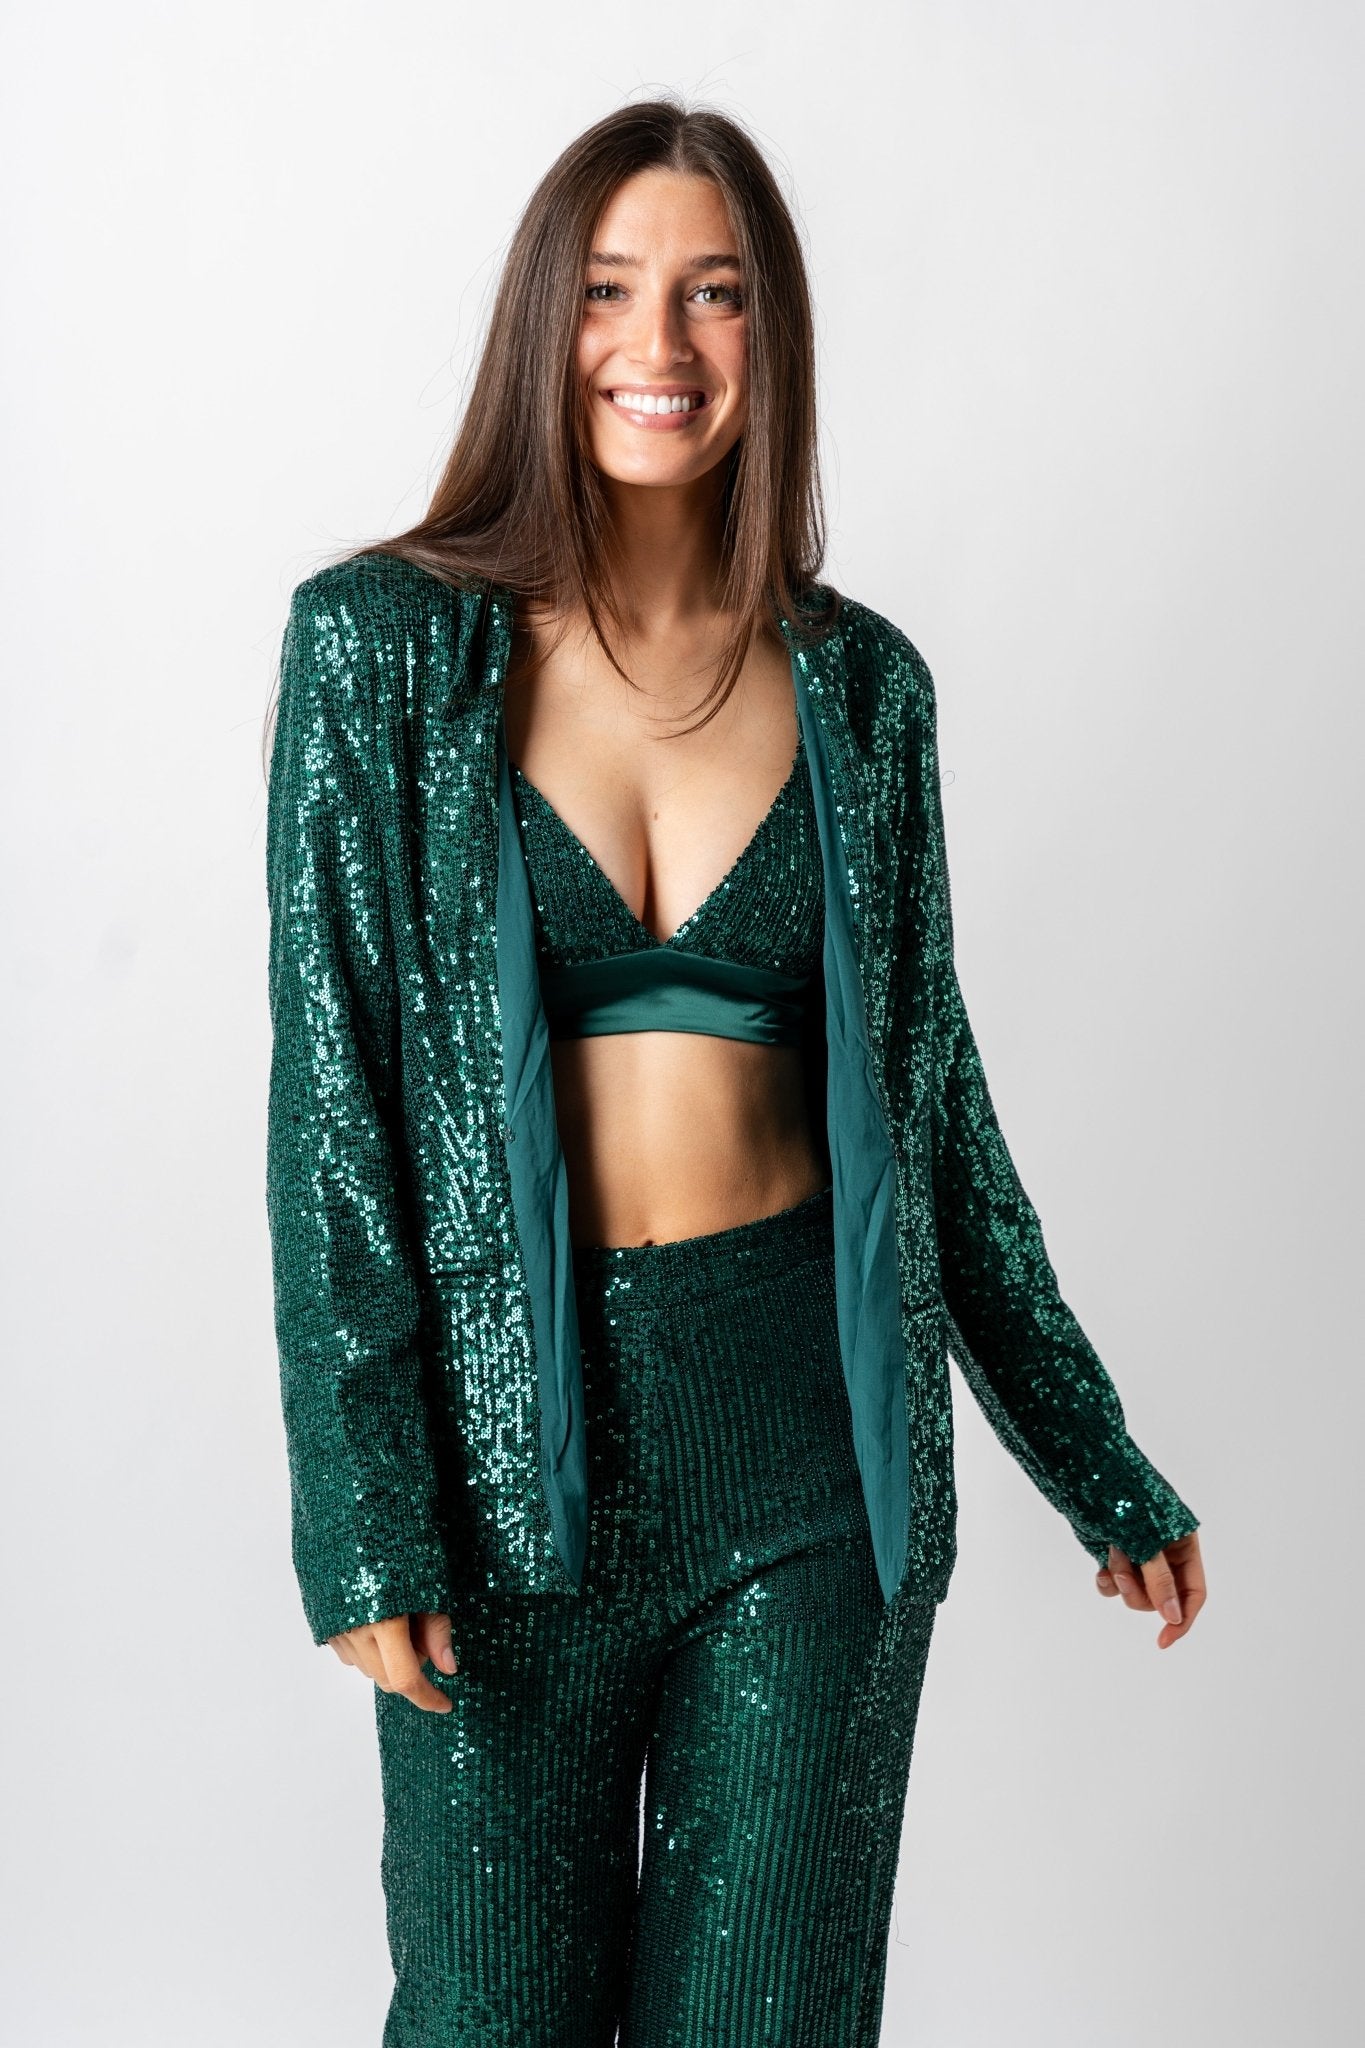 Sequin oversized blazer green – Affordable Blazers | Cute Black Jackets at Lush Fashion Lounge Boutique in Oklahoma City